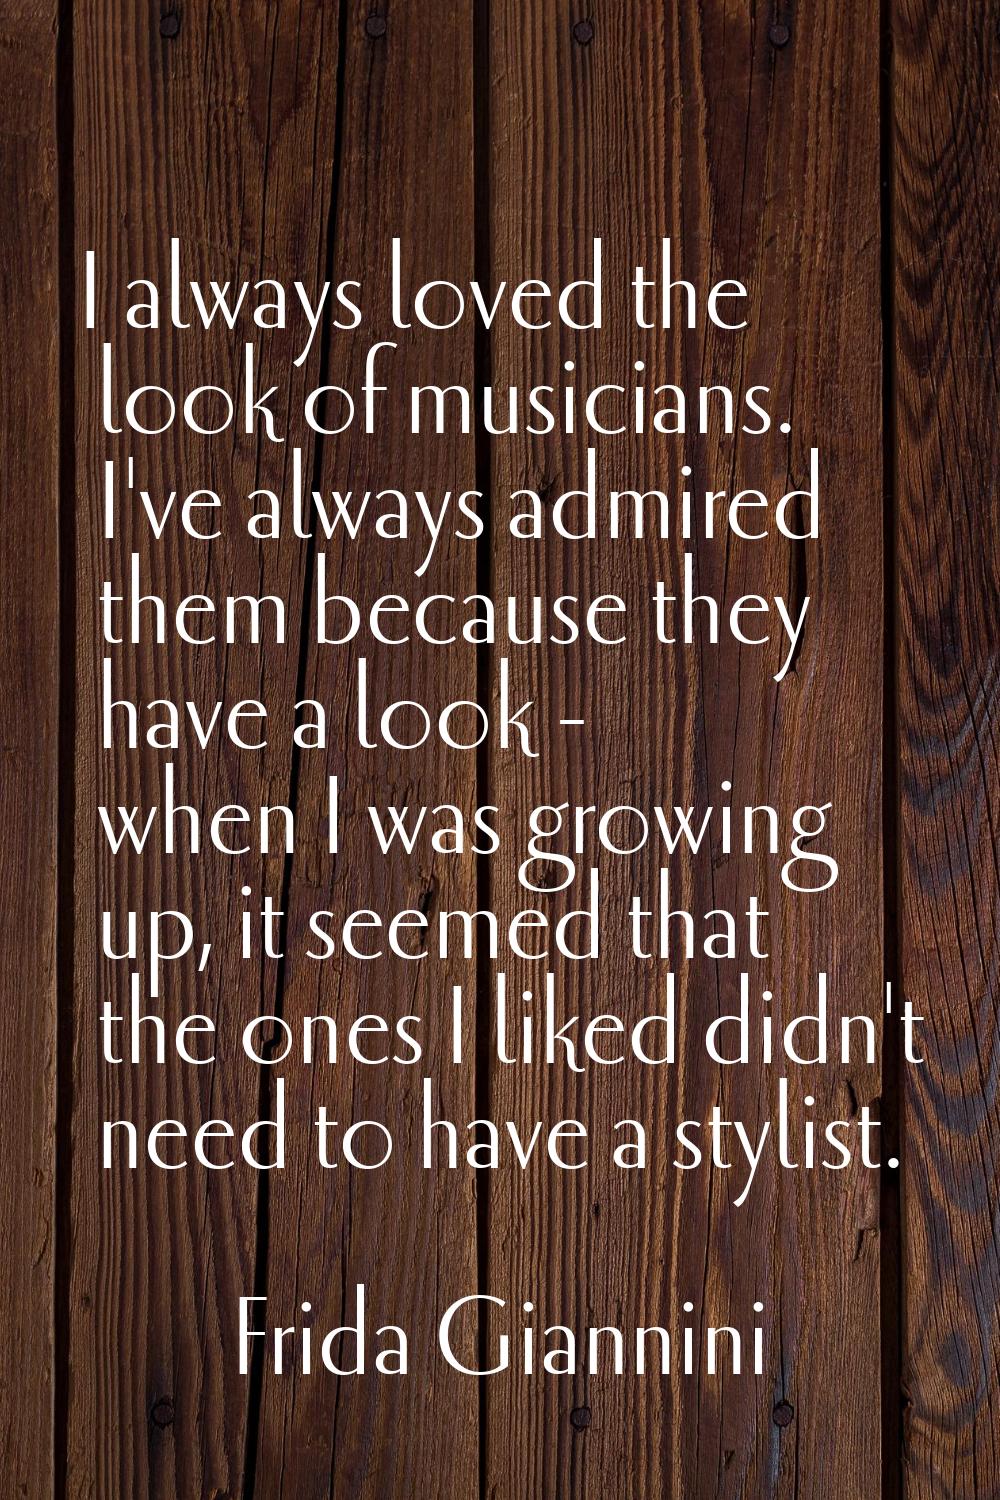 I always loved the look of musicians. I've always admired them because they have a look - when I wa